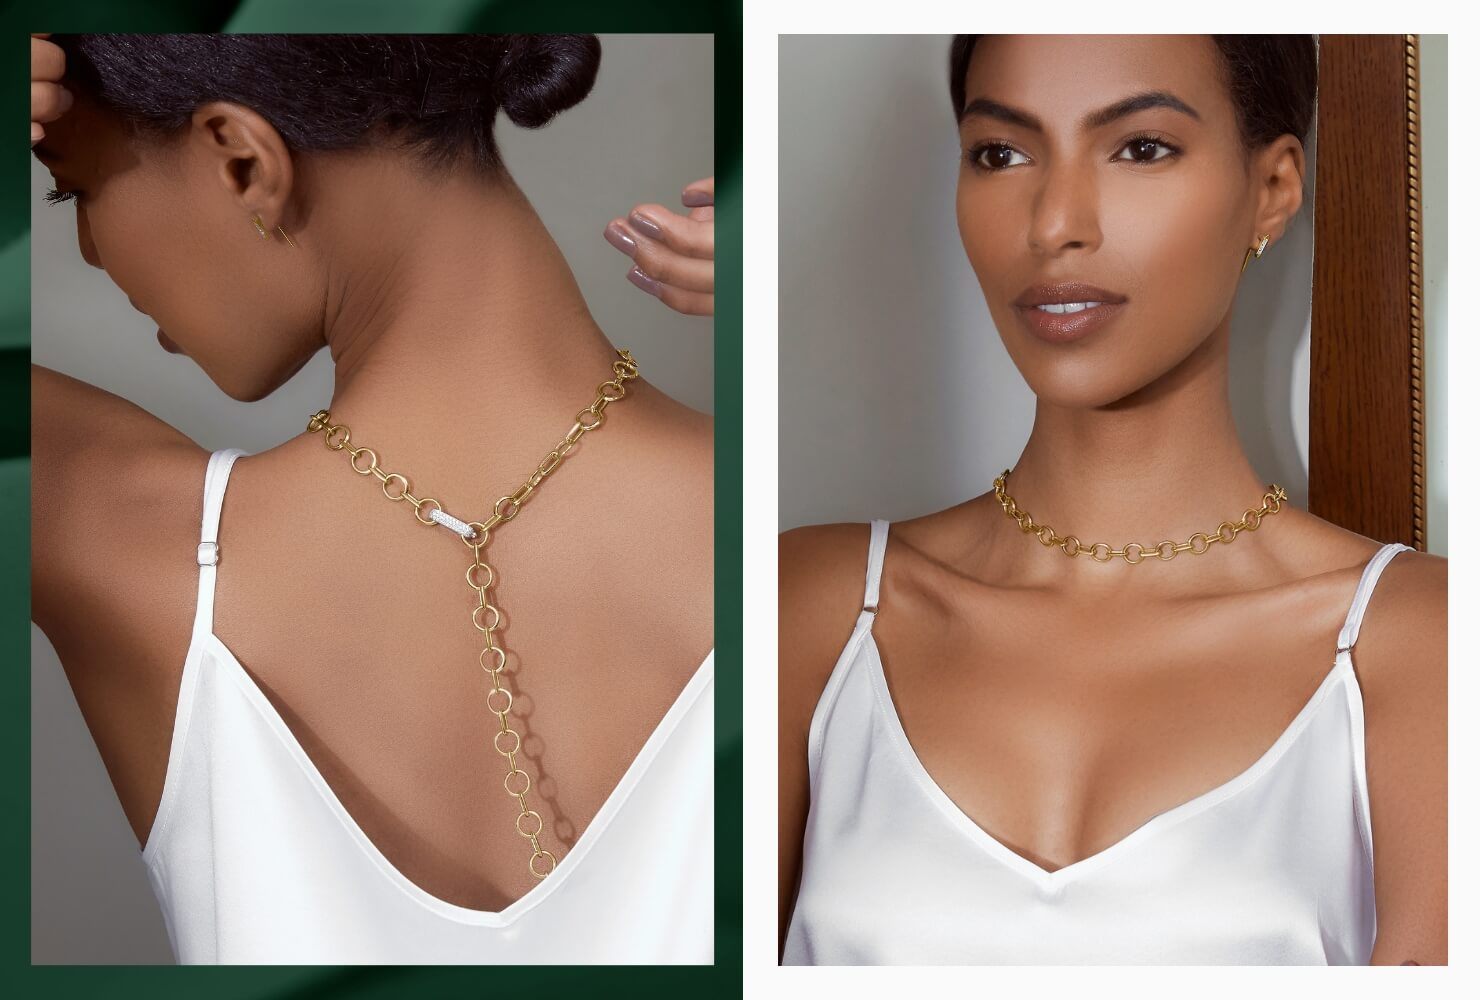 Image of a model facing away from the camera wearing Ecksand's Duel Oversized Gold Necklace next to an image of the same model facing toward the camera wearing the same necklace.